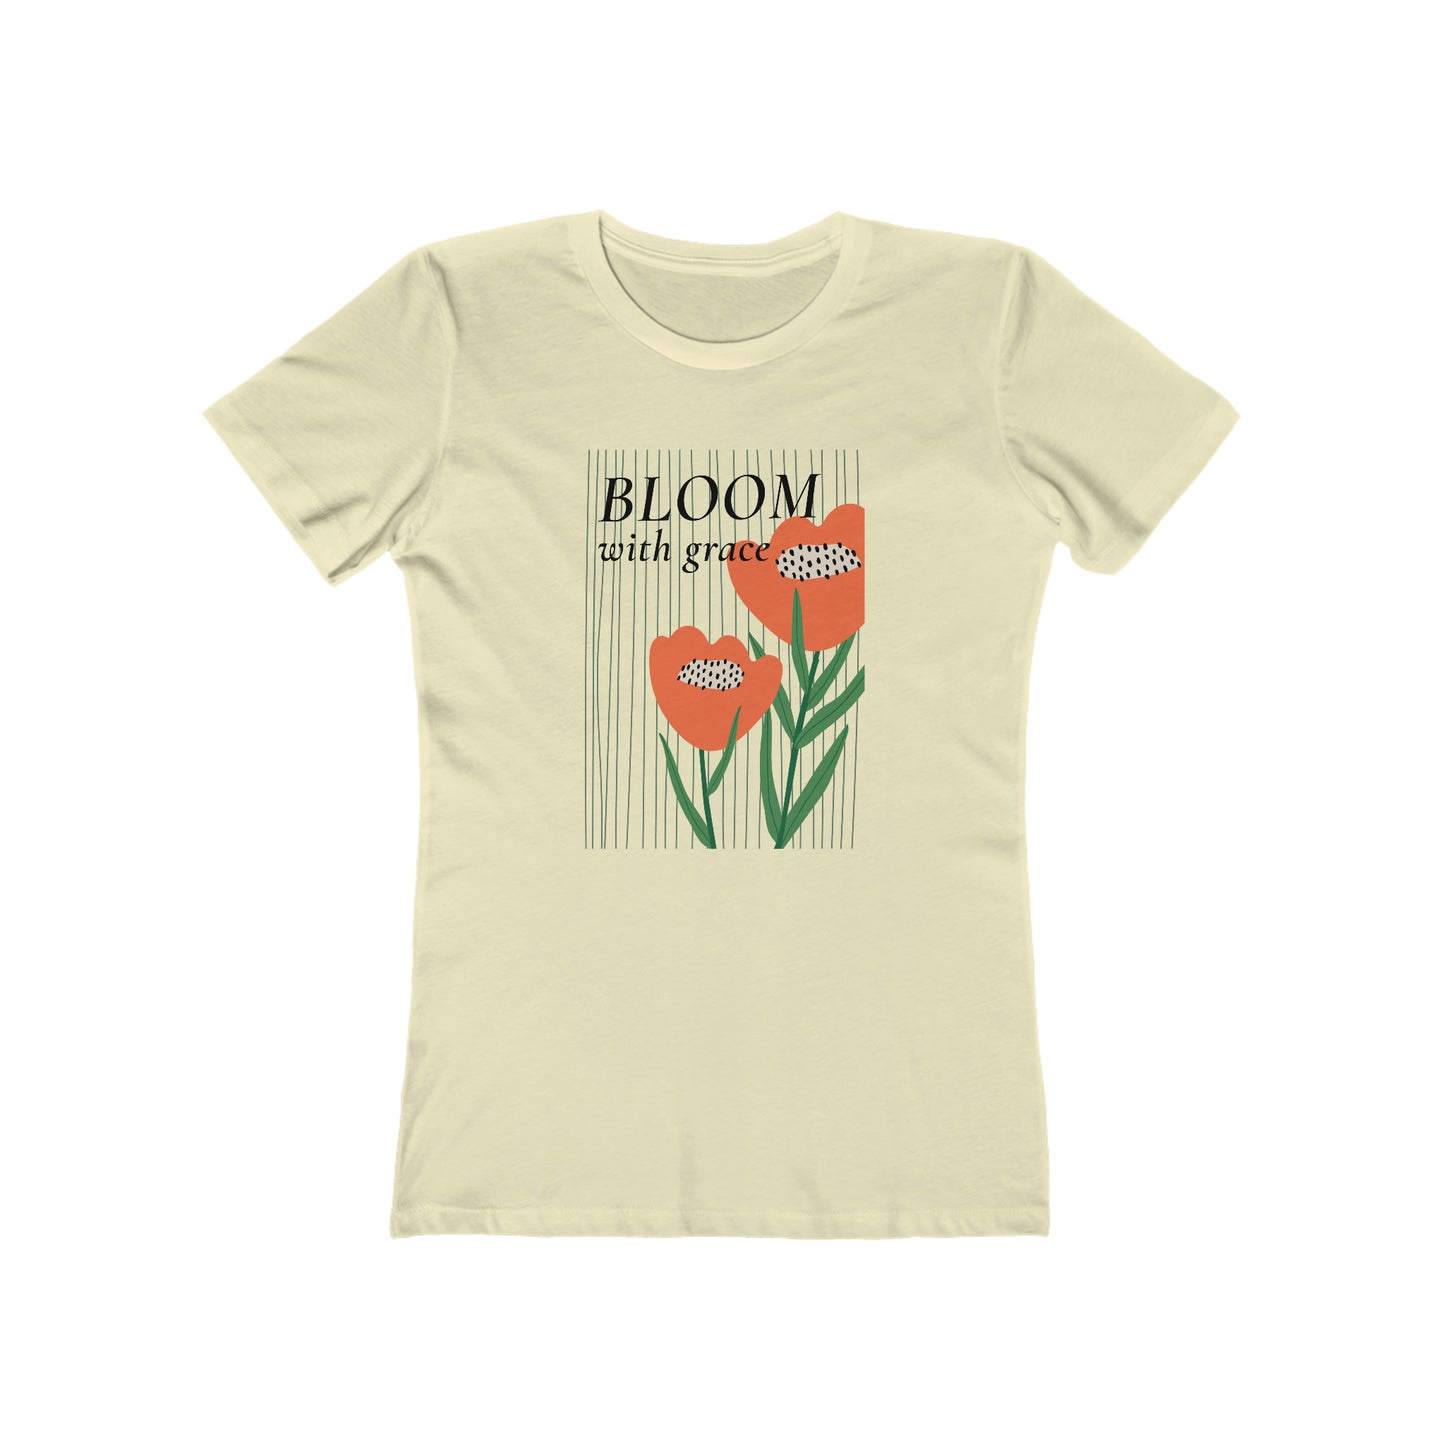 Bloom With Grace - Women's T-Shirt